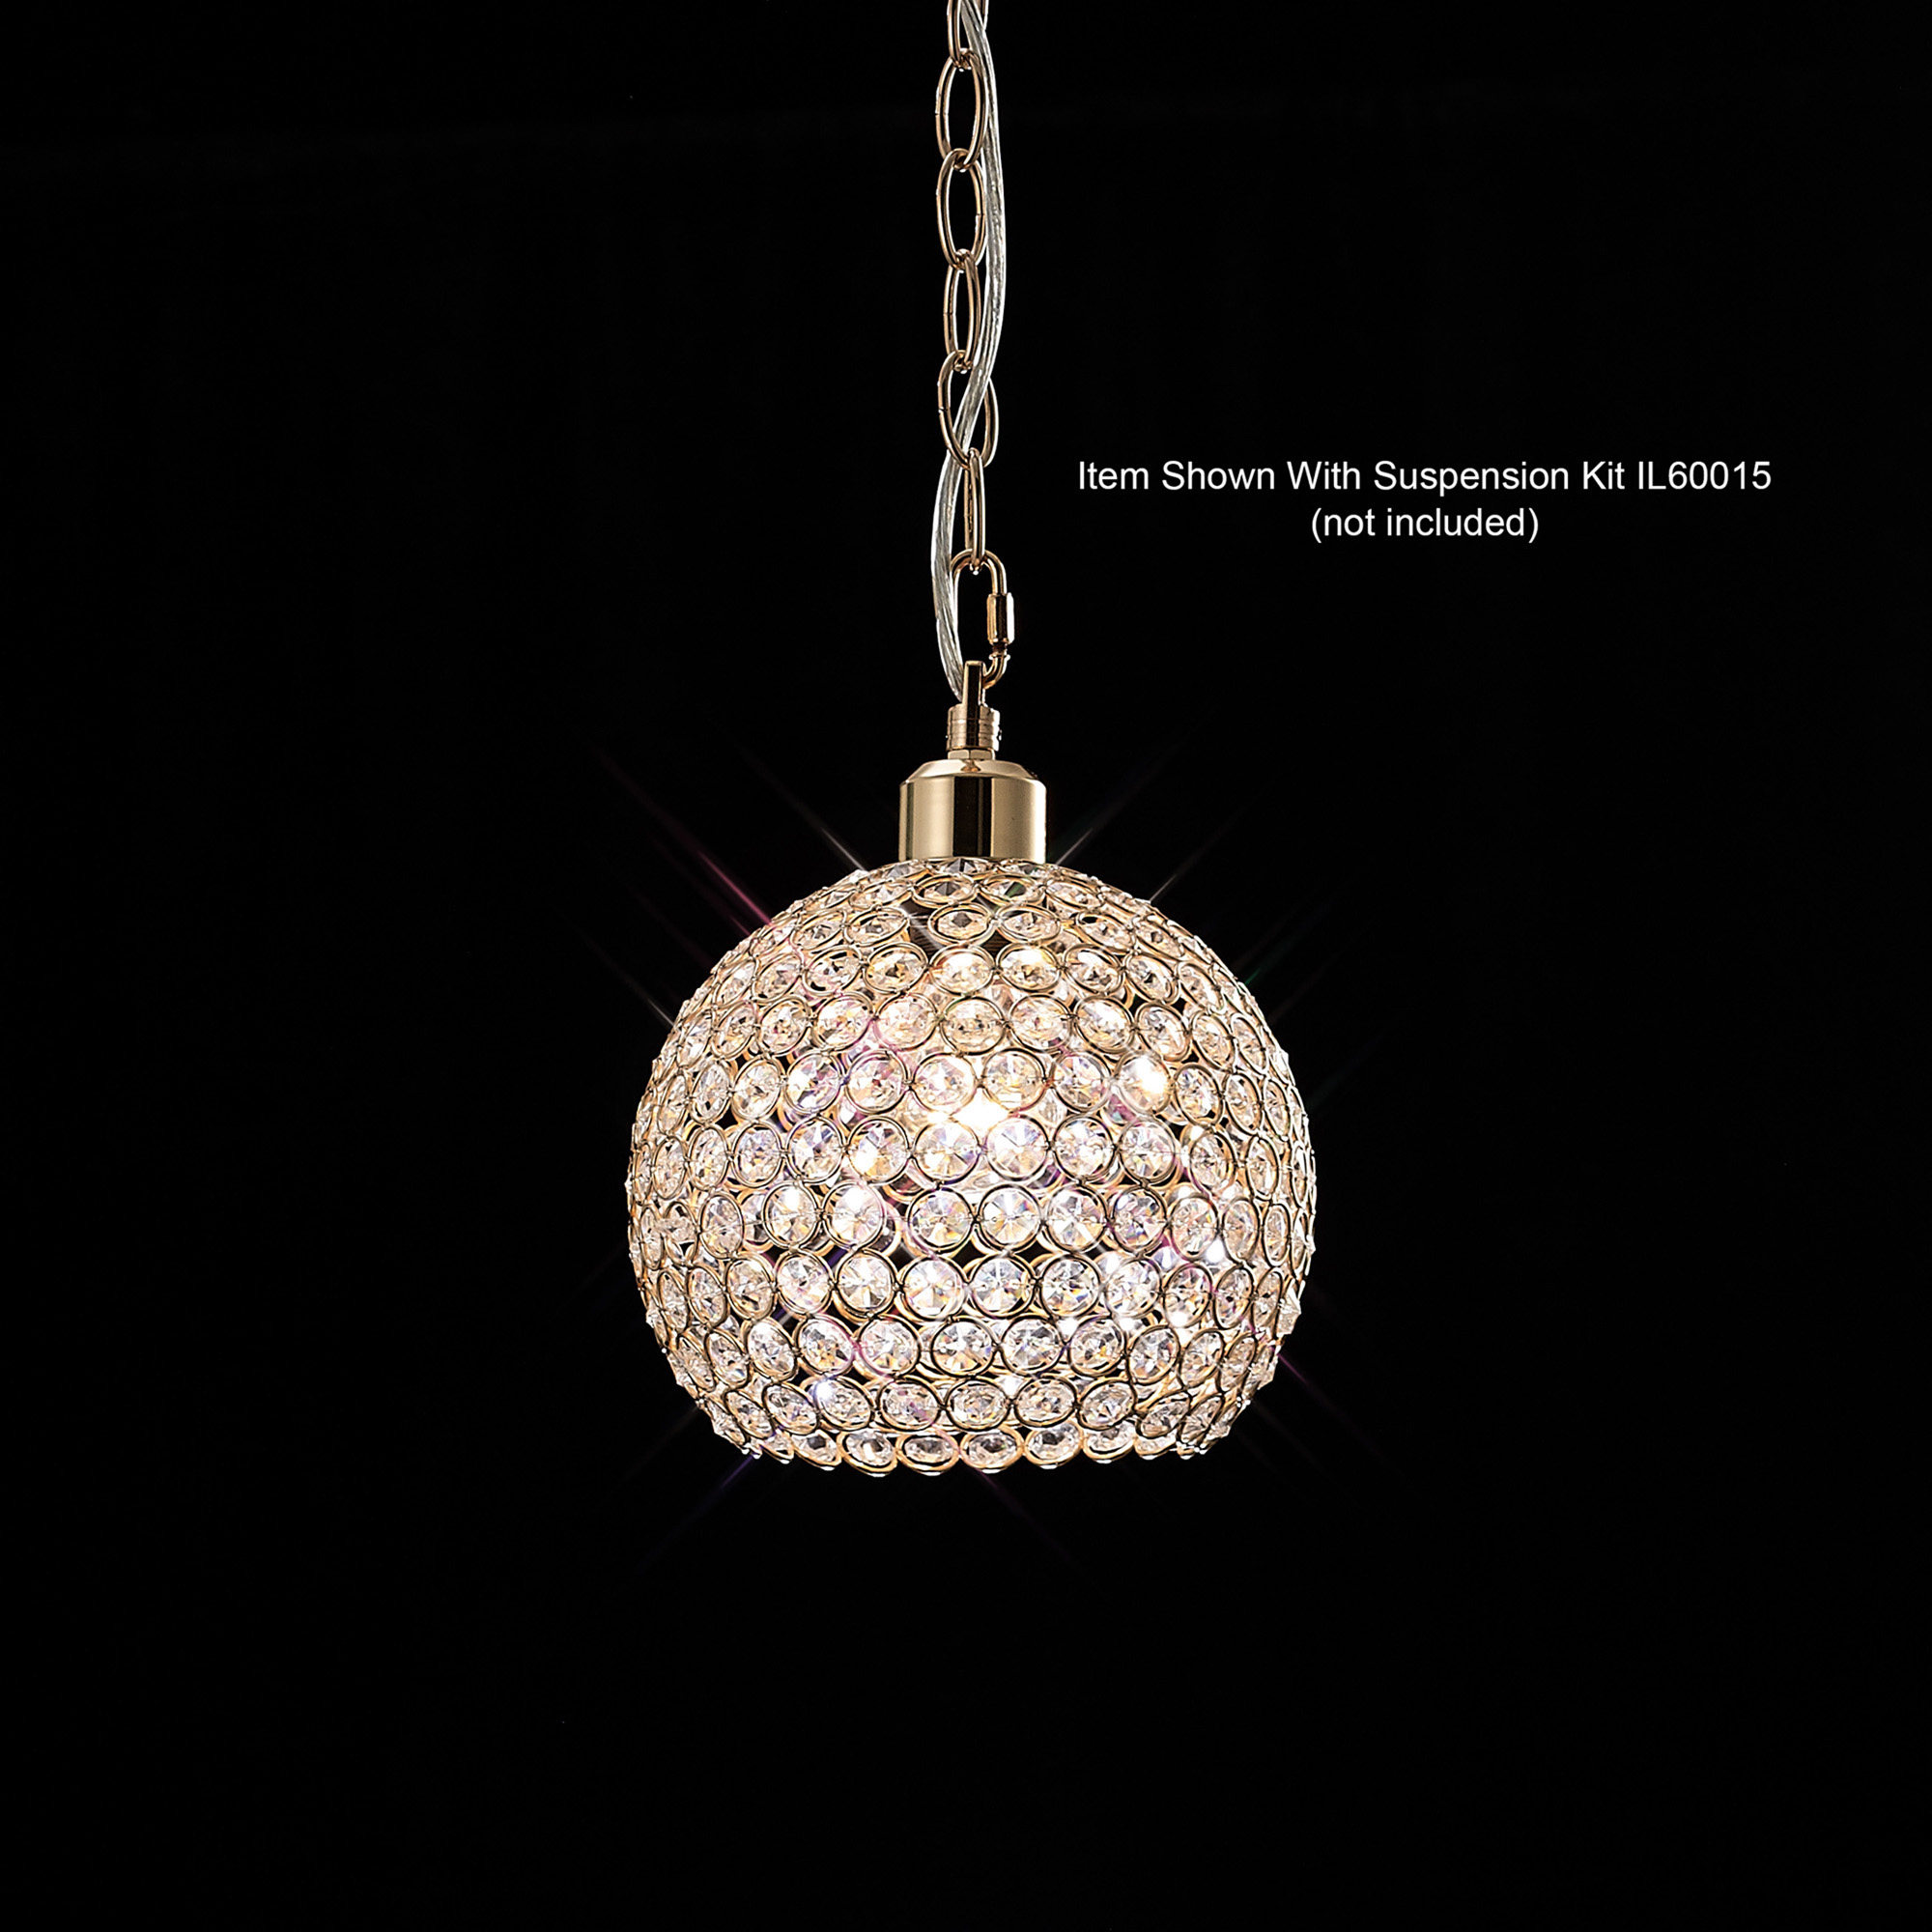 IL30762  Kudo Crystal Ball Non-Electric SHADE ONLY French Gold